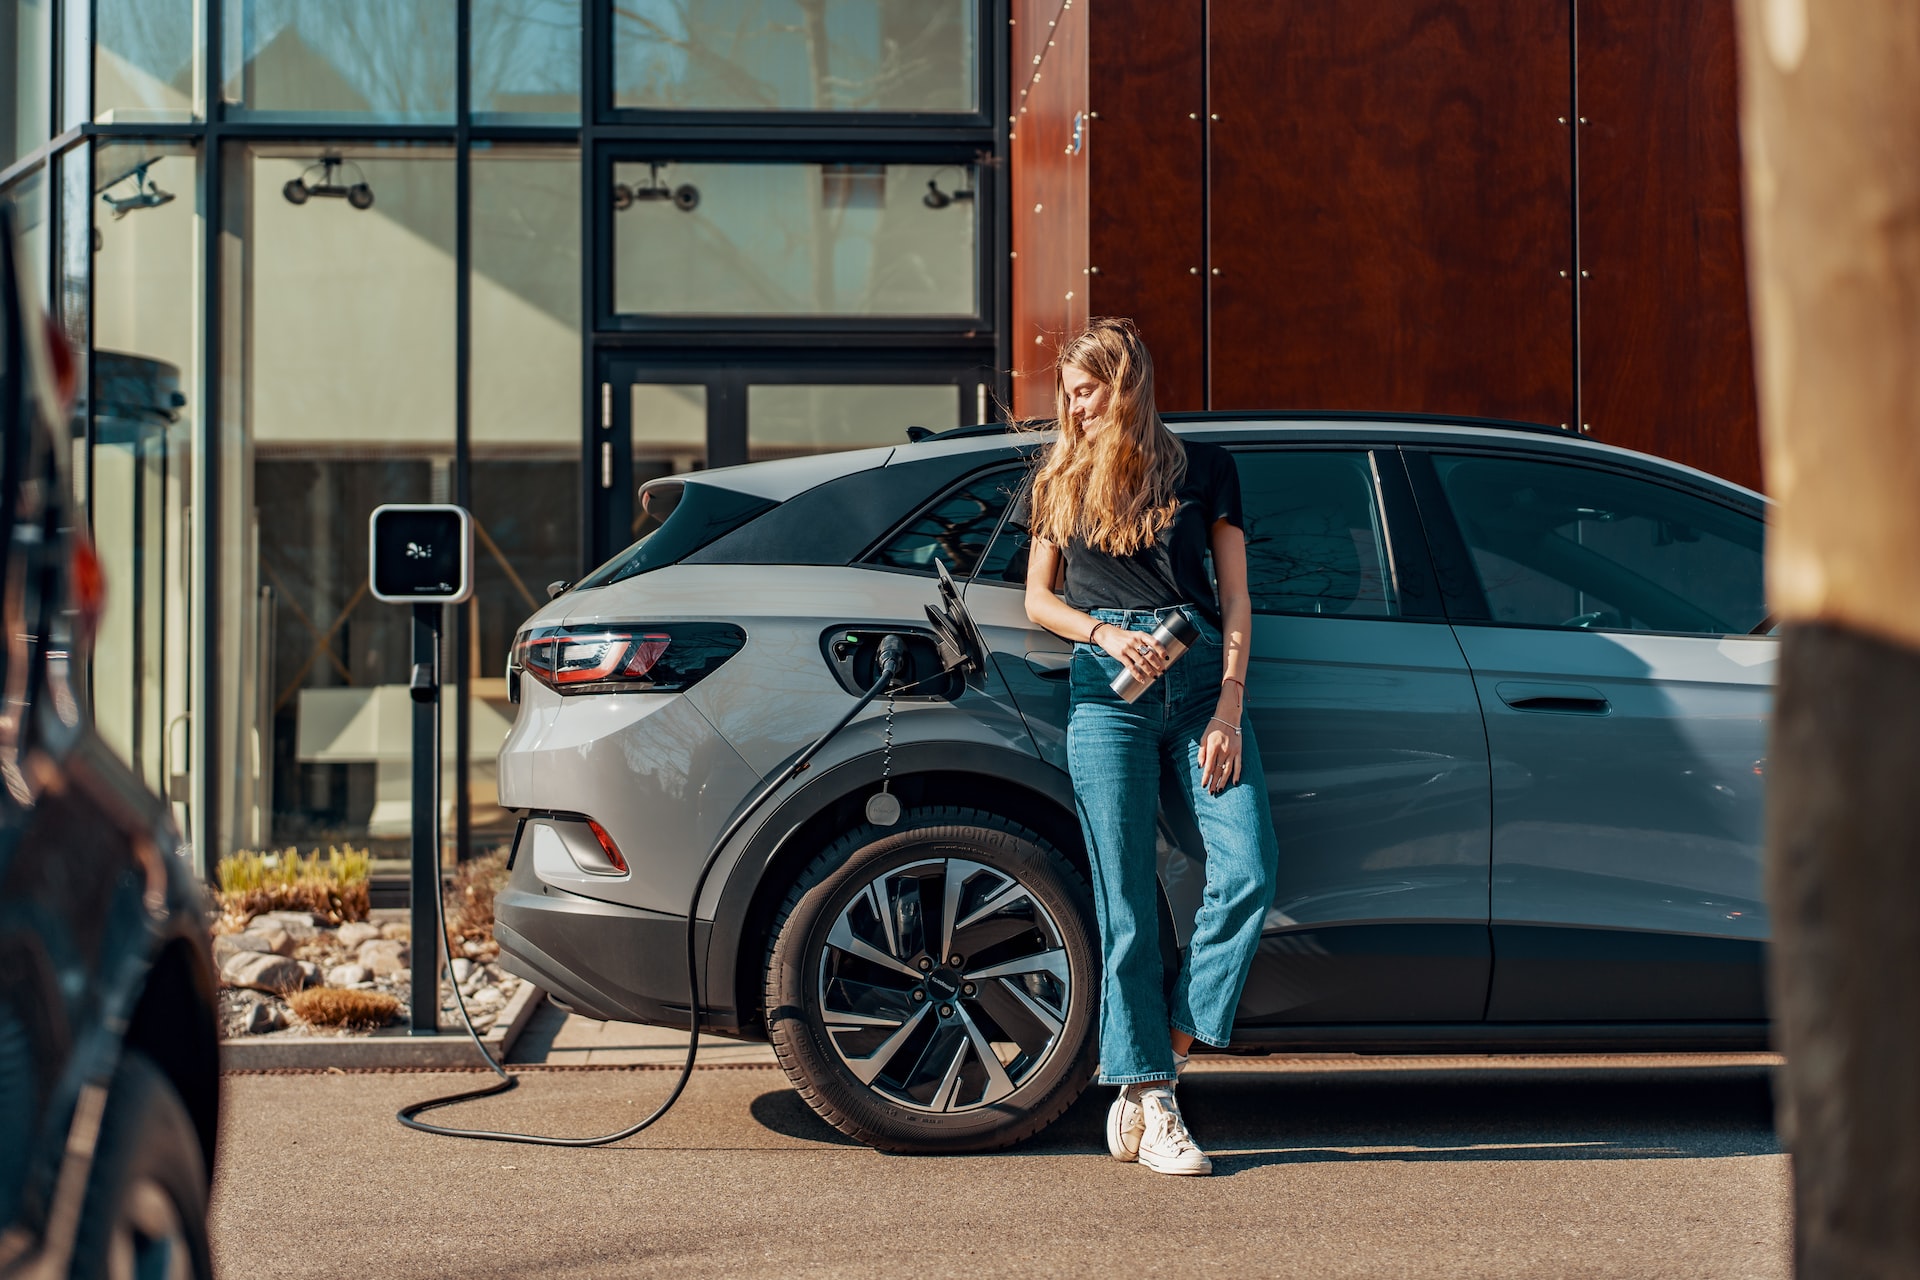 A woman standing next to car at a charging station.